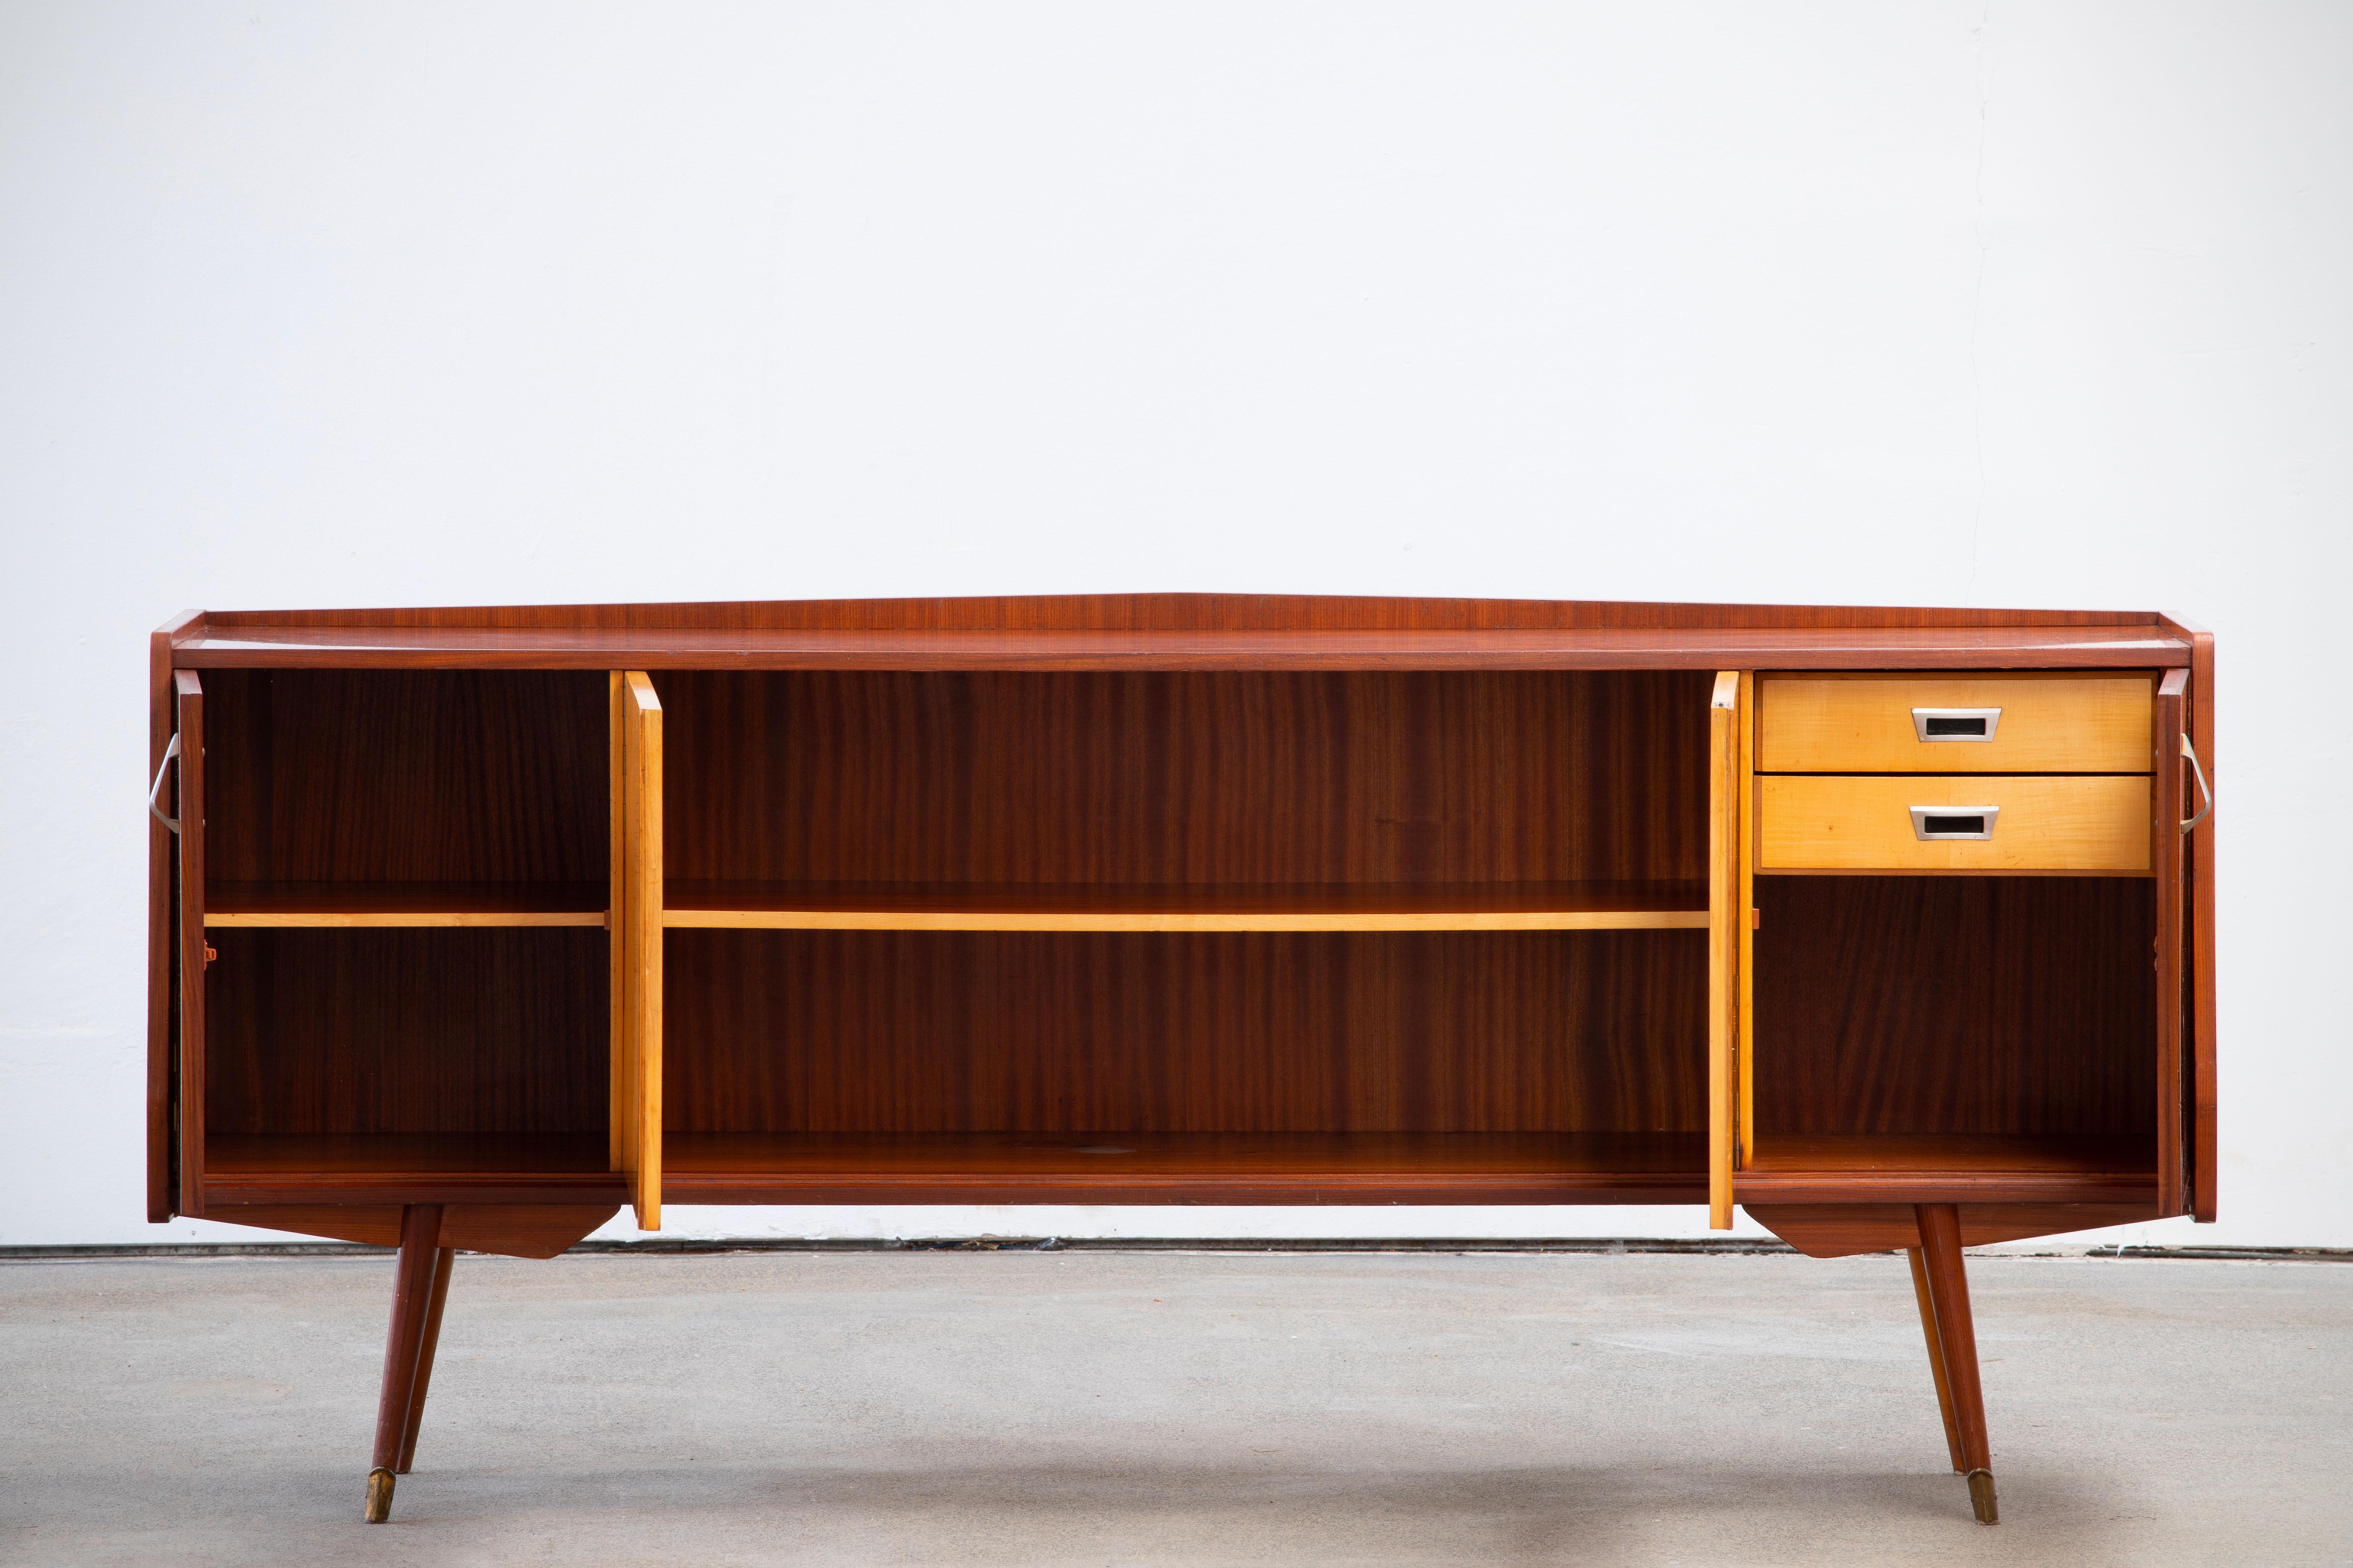 Credenza, walnut, maple, France, 1950s

This sideboard is elegant in every way. This piece is playful and airy.